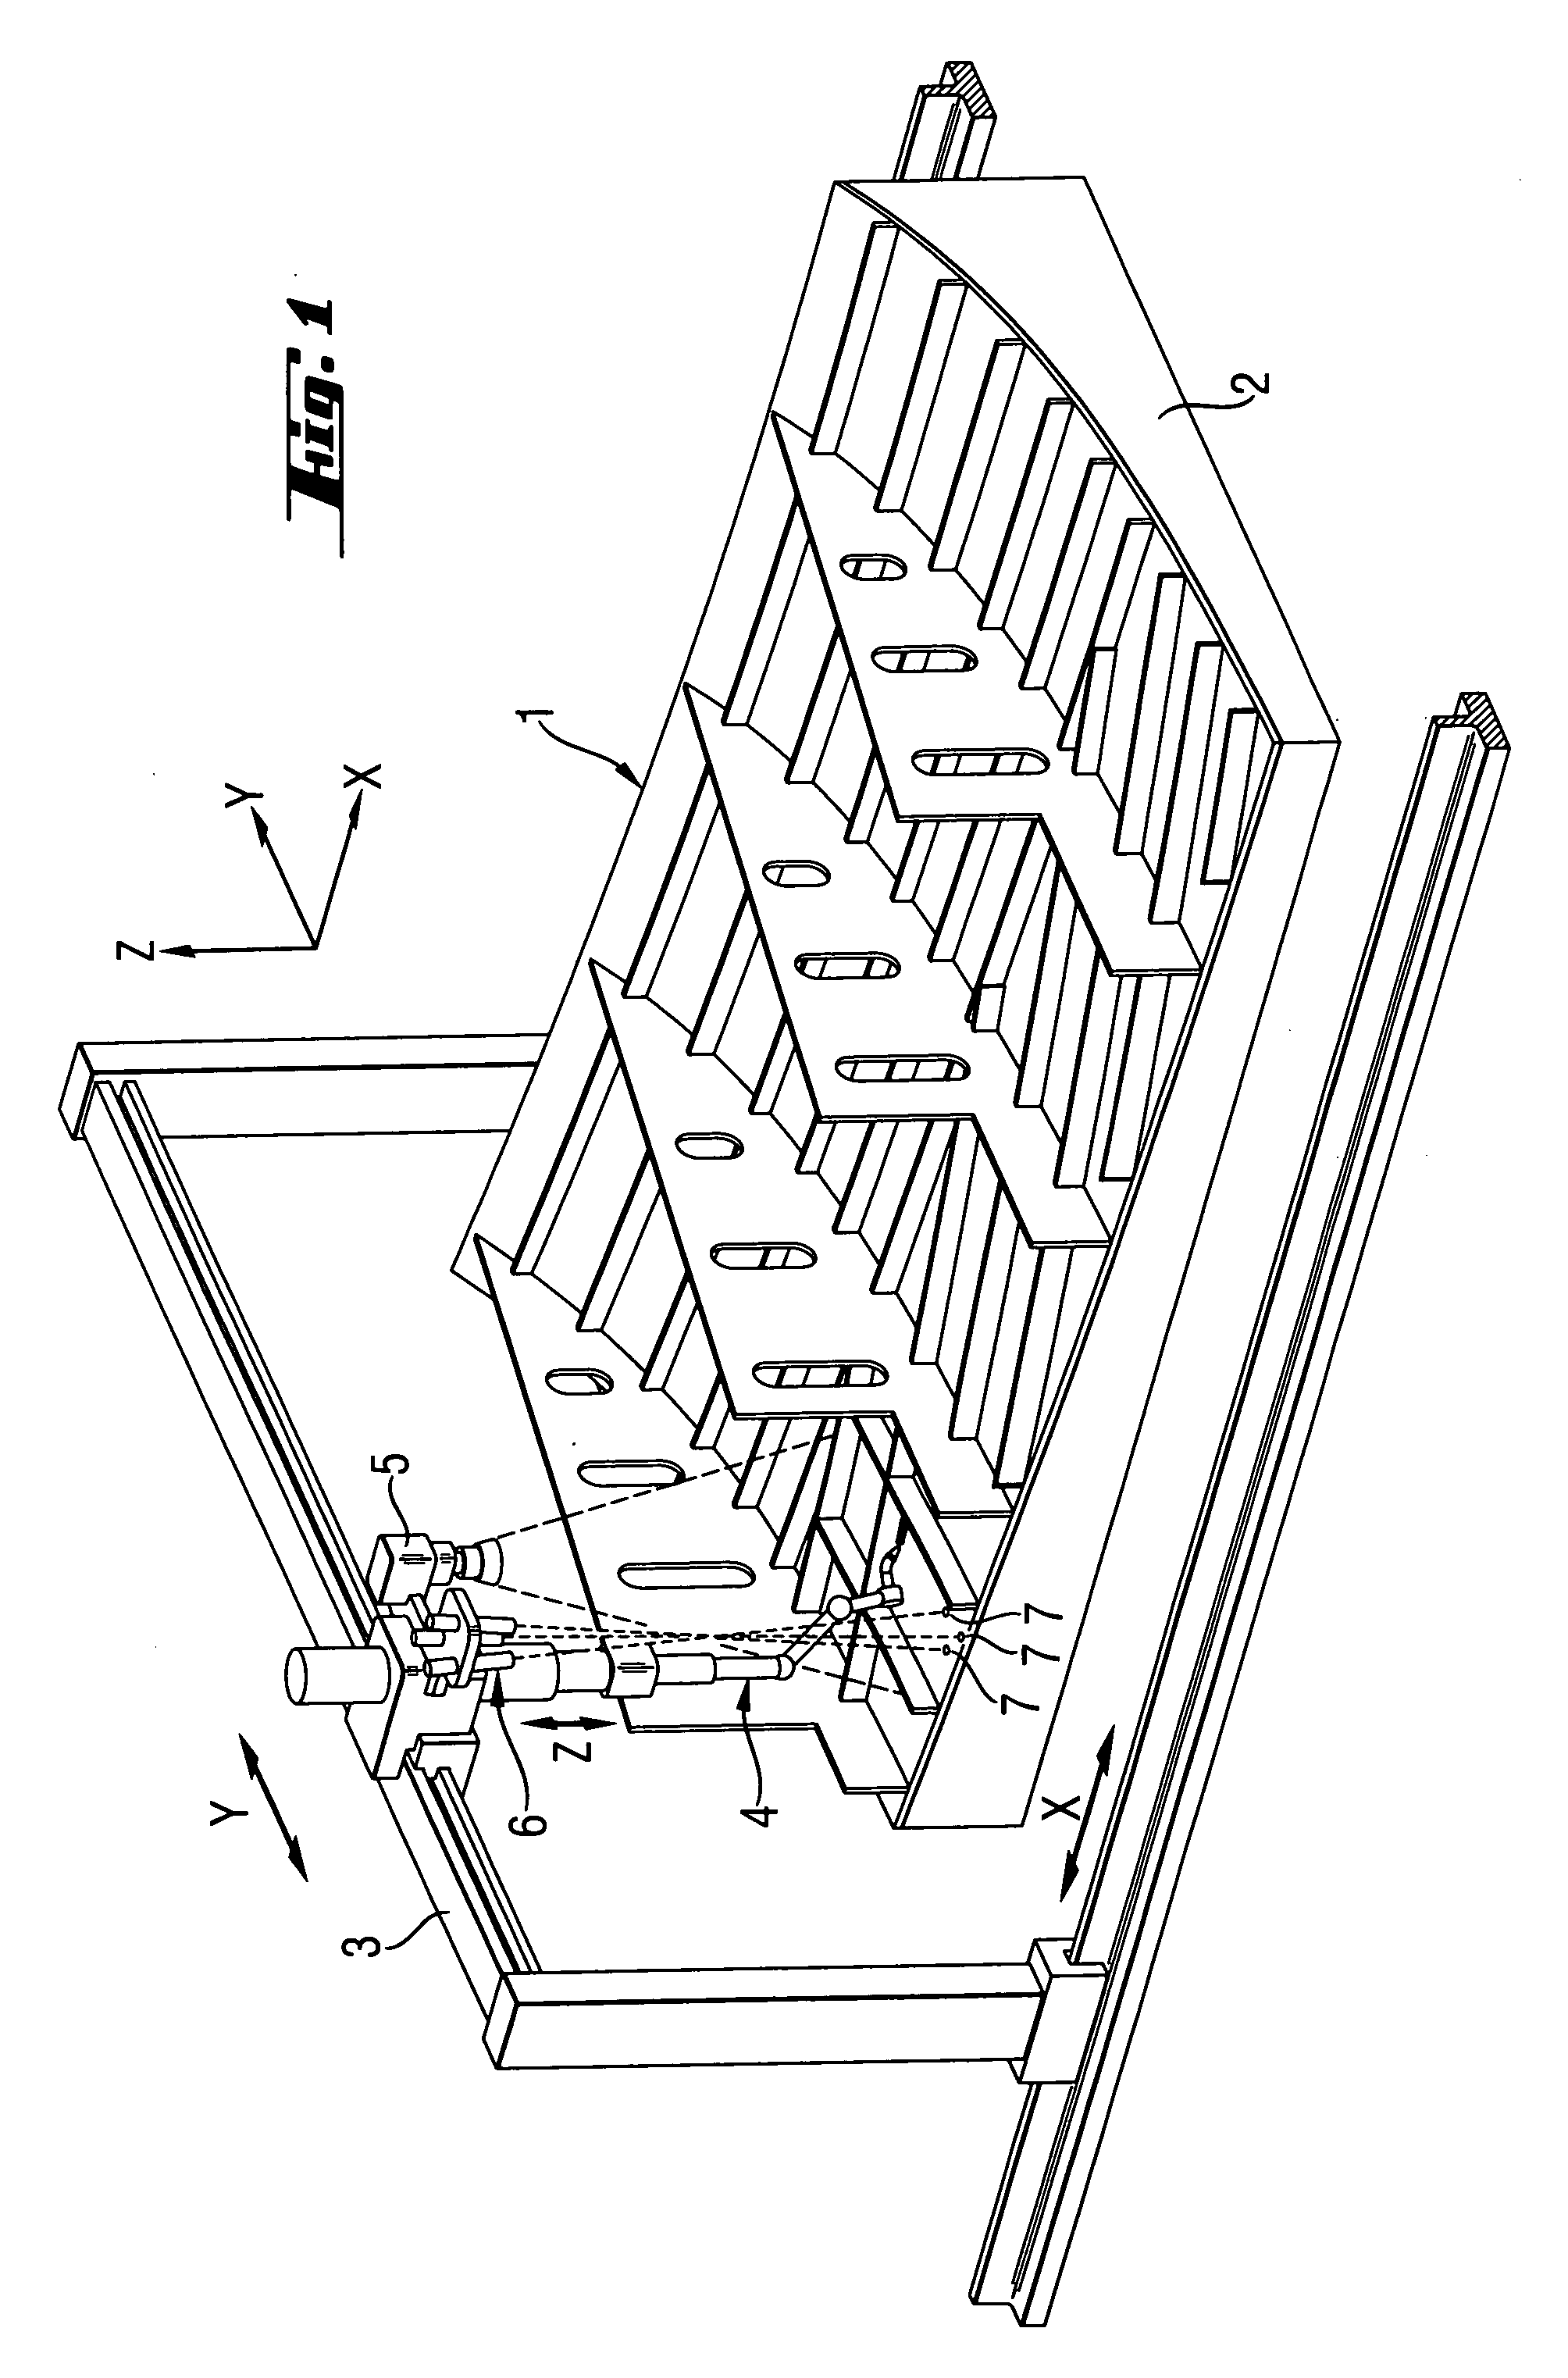 Method of controlling the welding of a three-dimensional structure